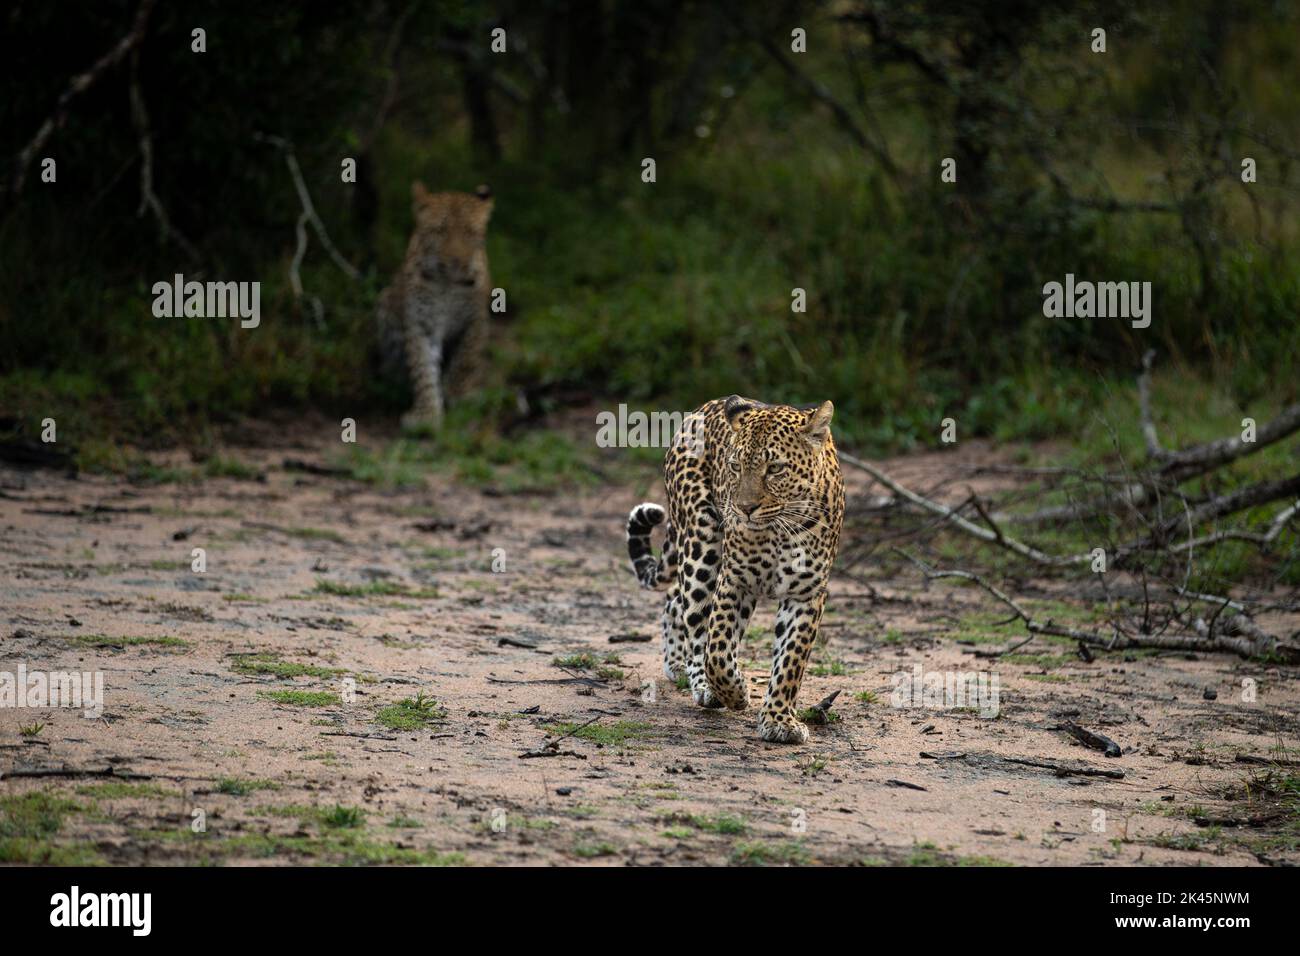 A leopard, Panthera pardus, walks with its cub following behind. Stock Photo